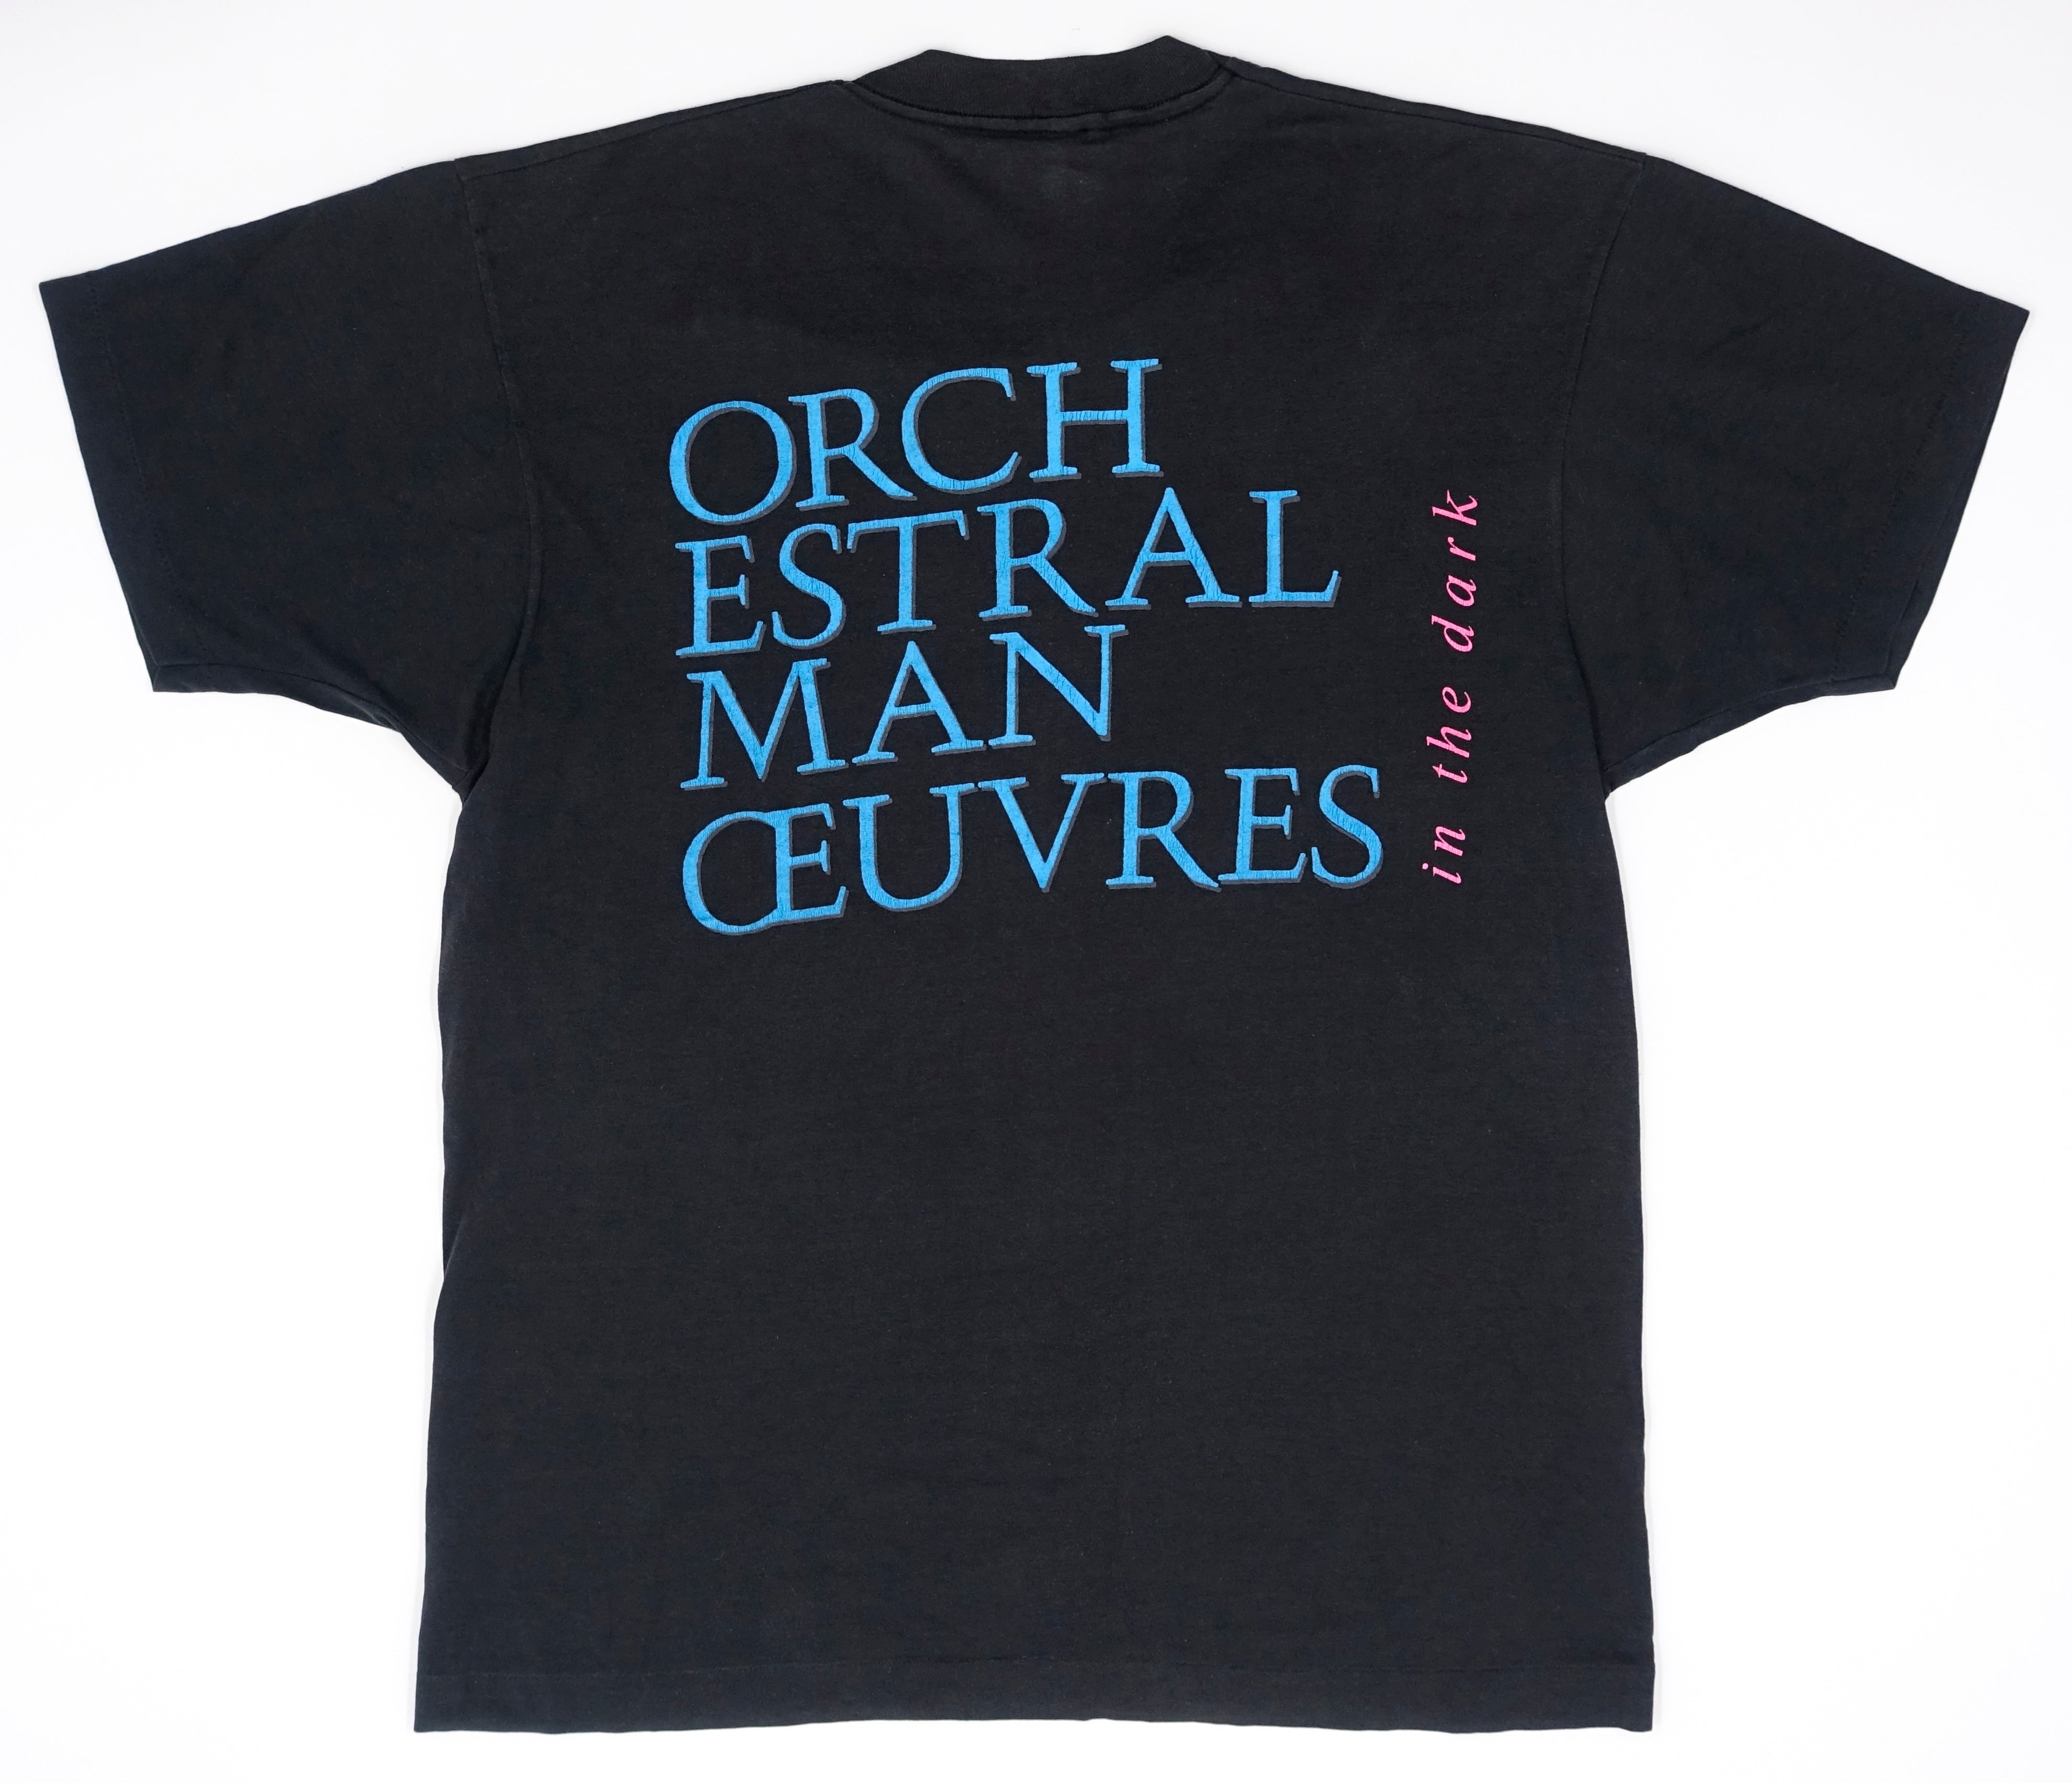 Orchestral Manoeuvres In The Dark (OMD) - The Best Of OMD 1988 Tour Shirt (Screen Stars) Size XL